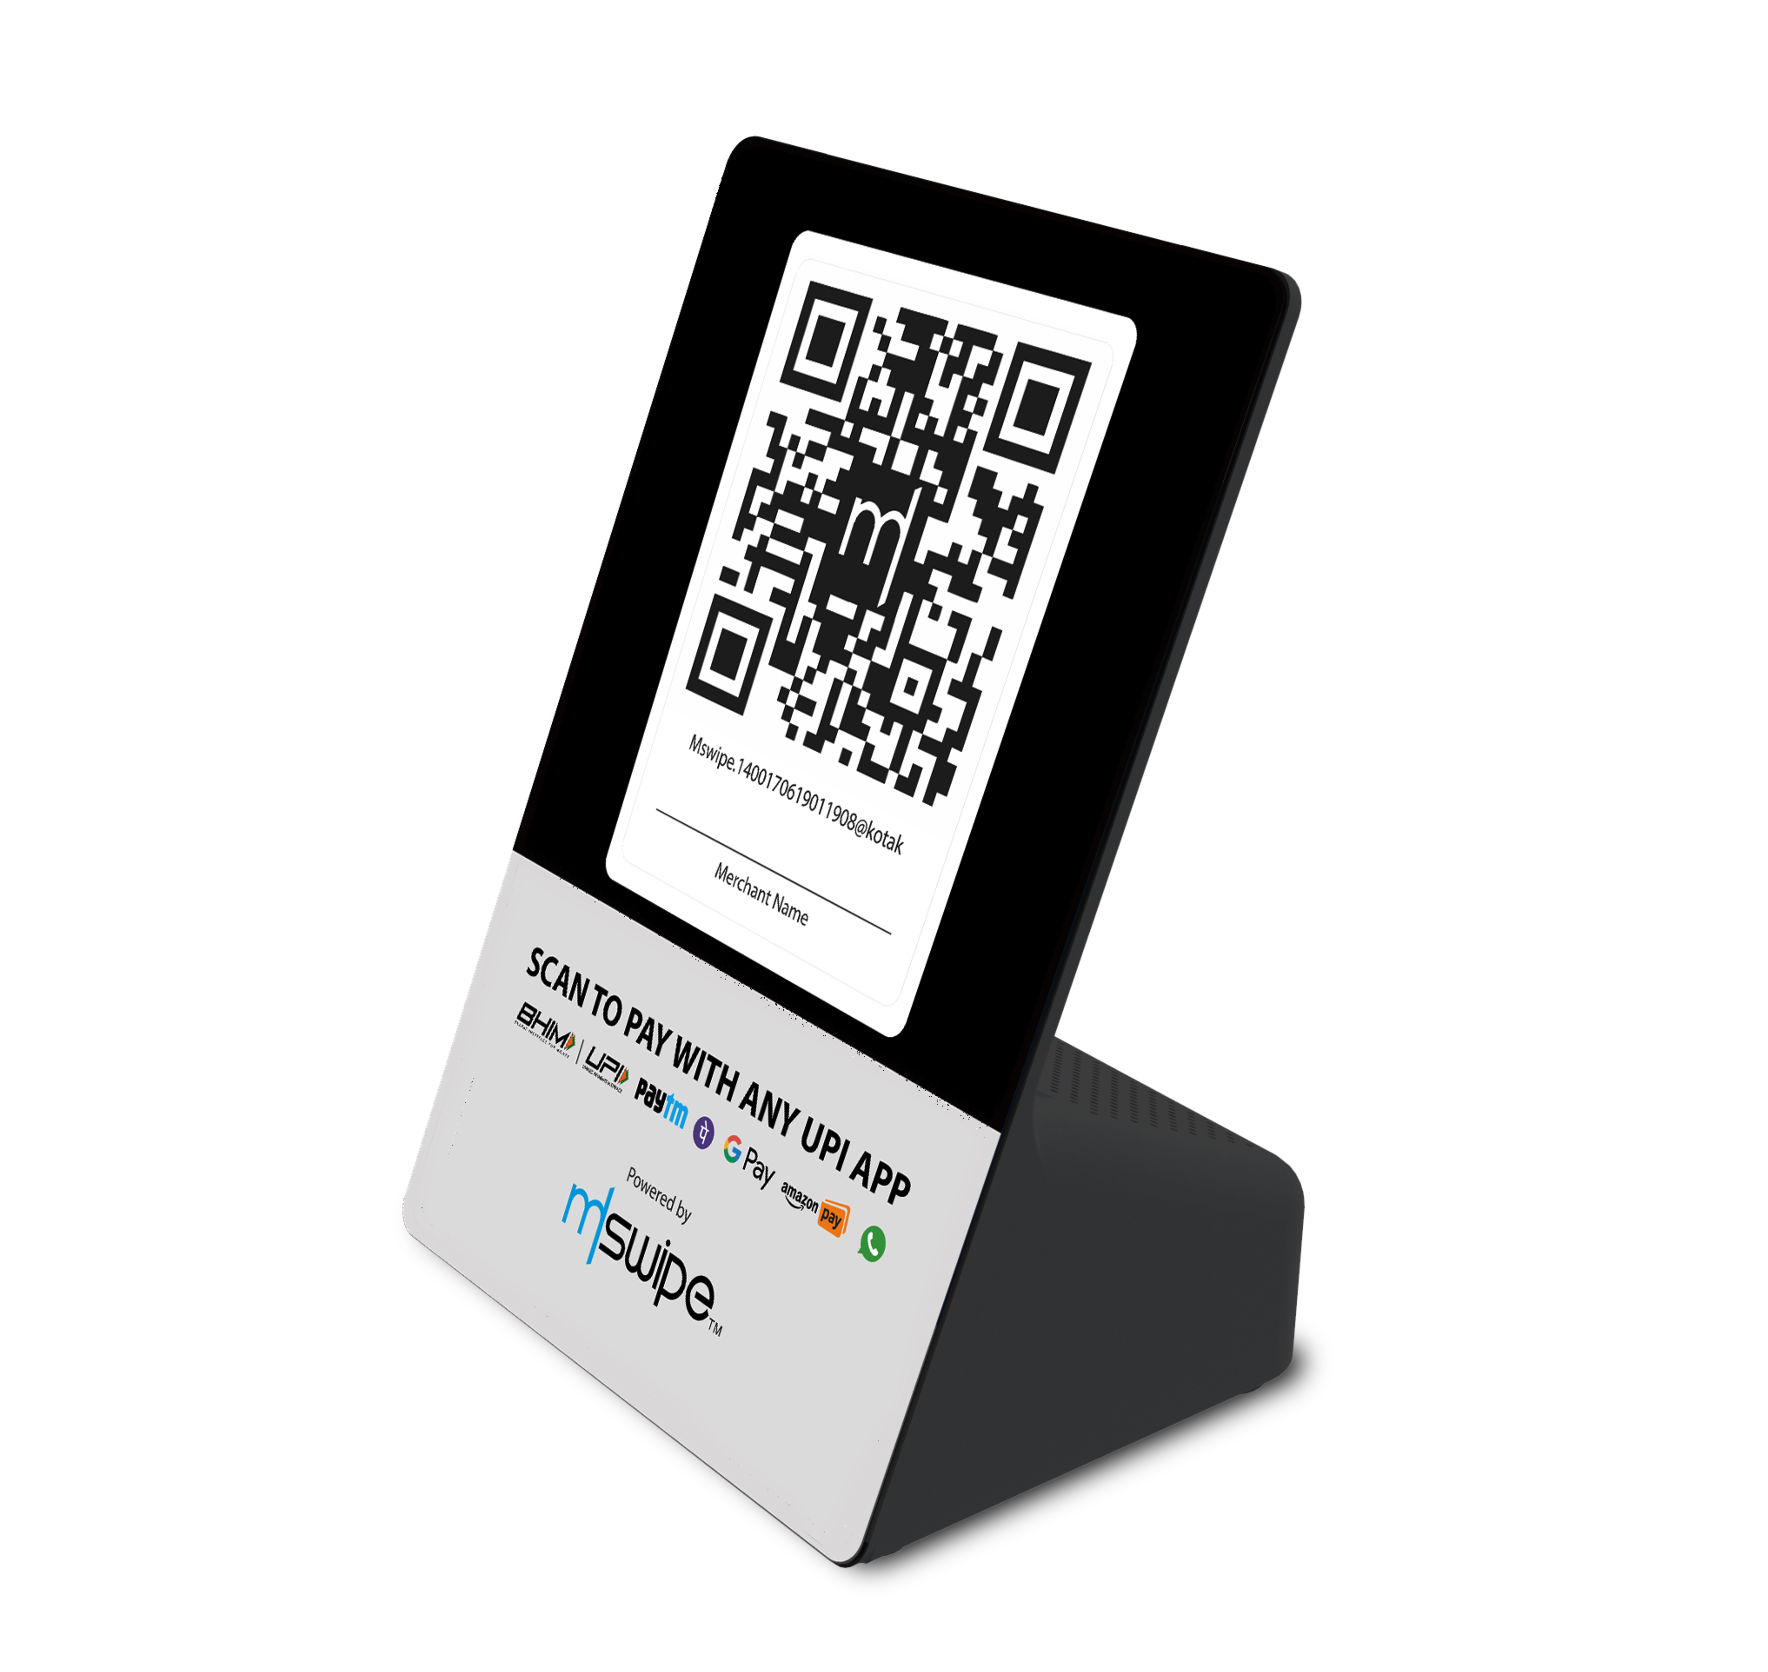 MSwipe - Accept payments with a QR code payment